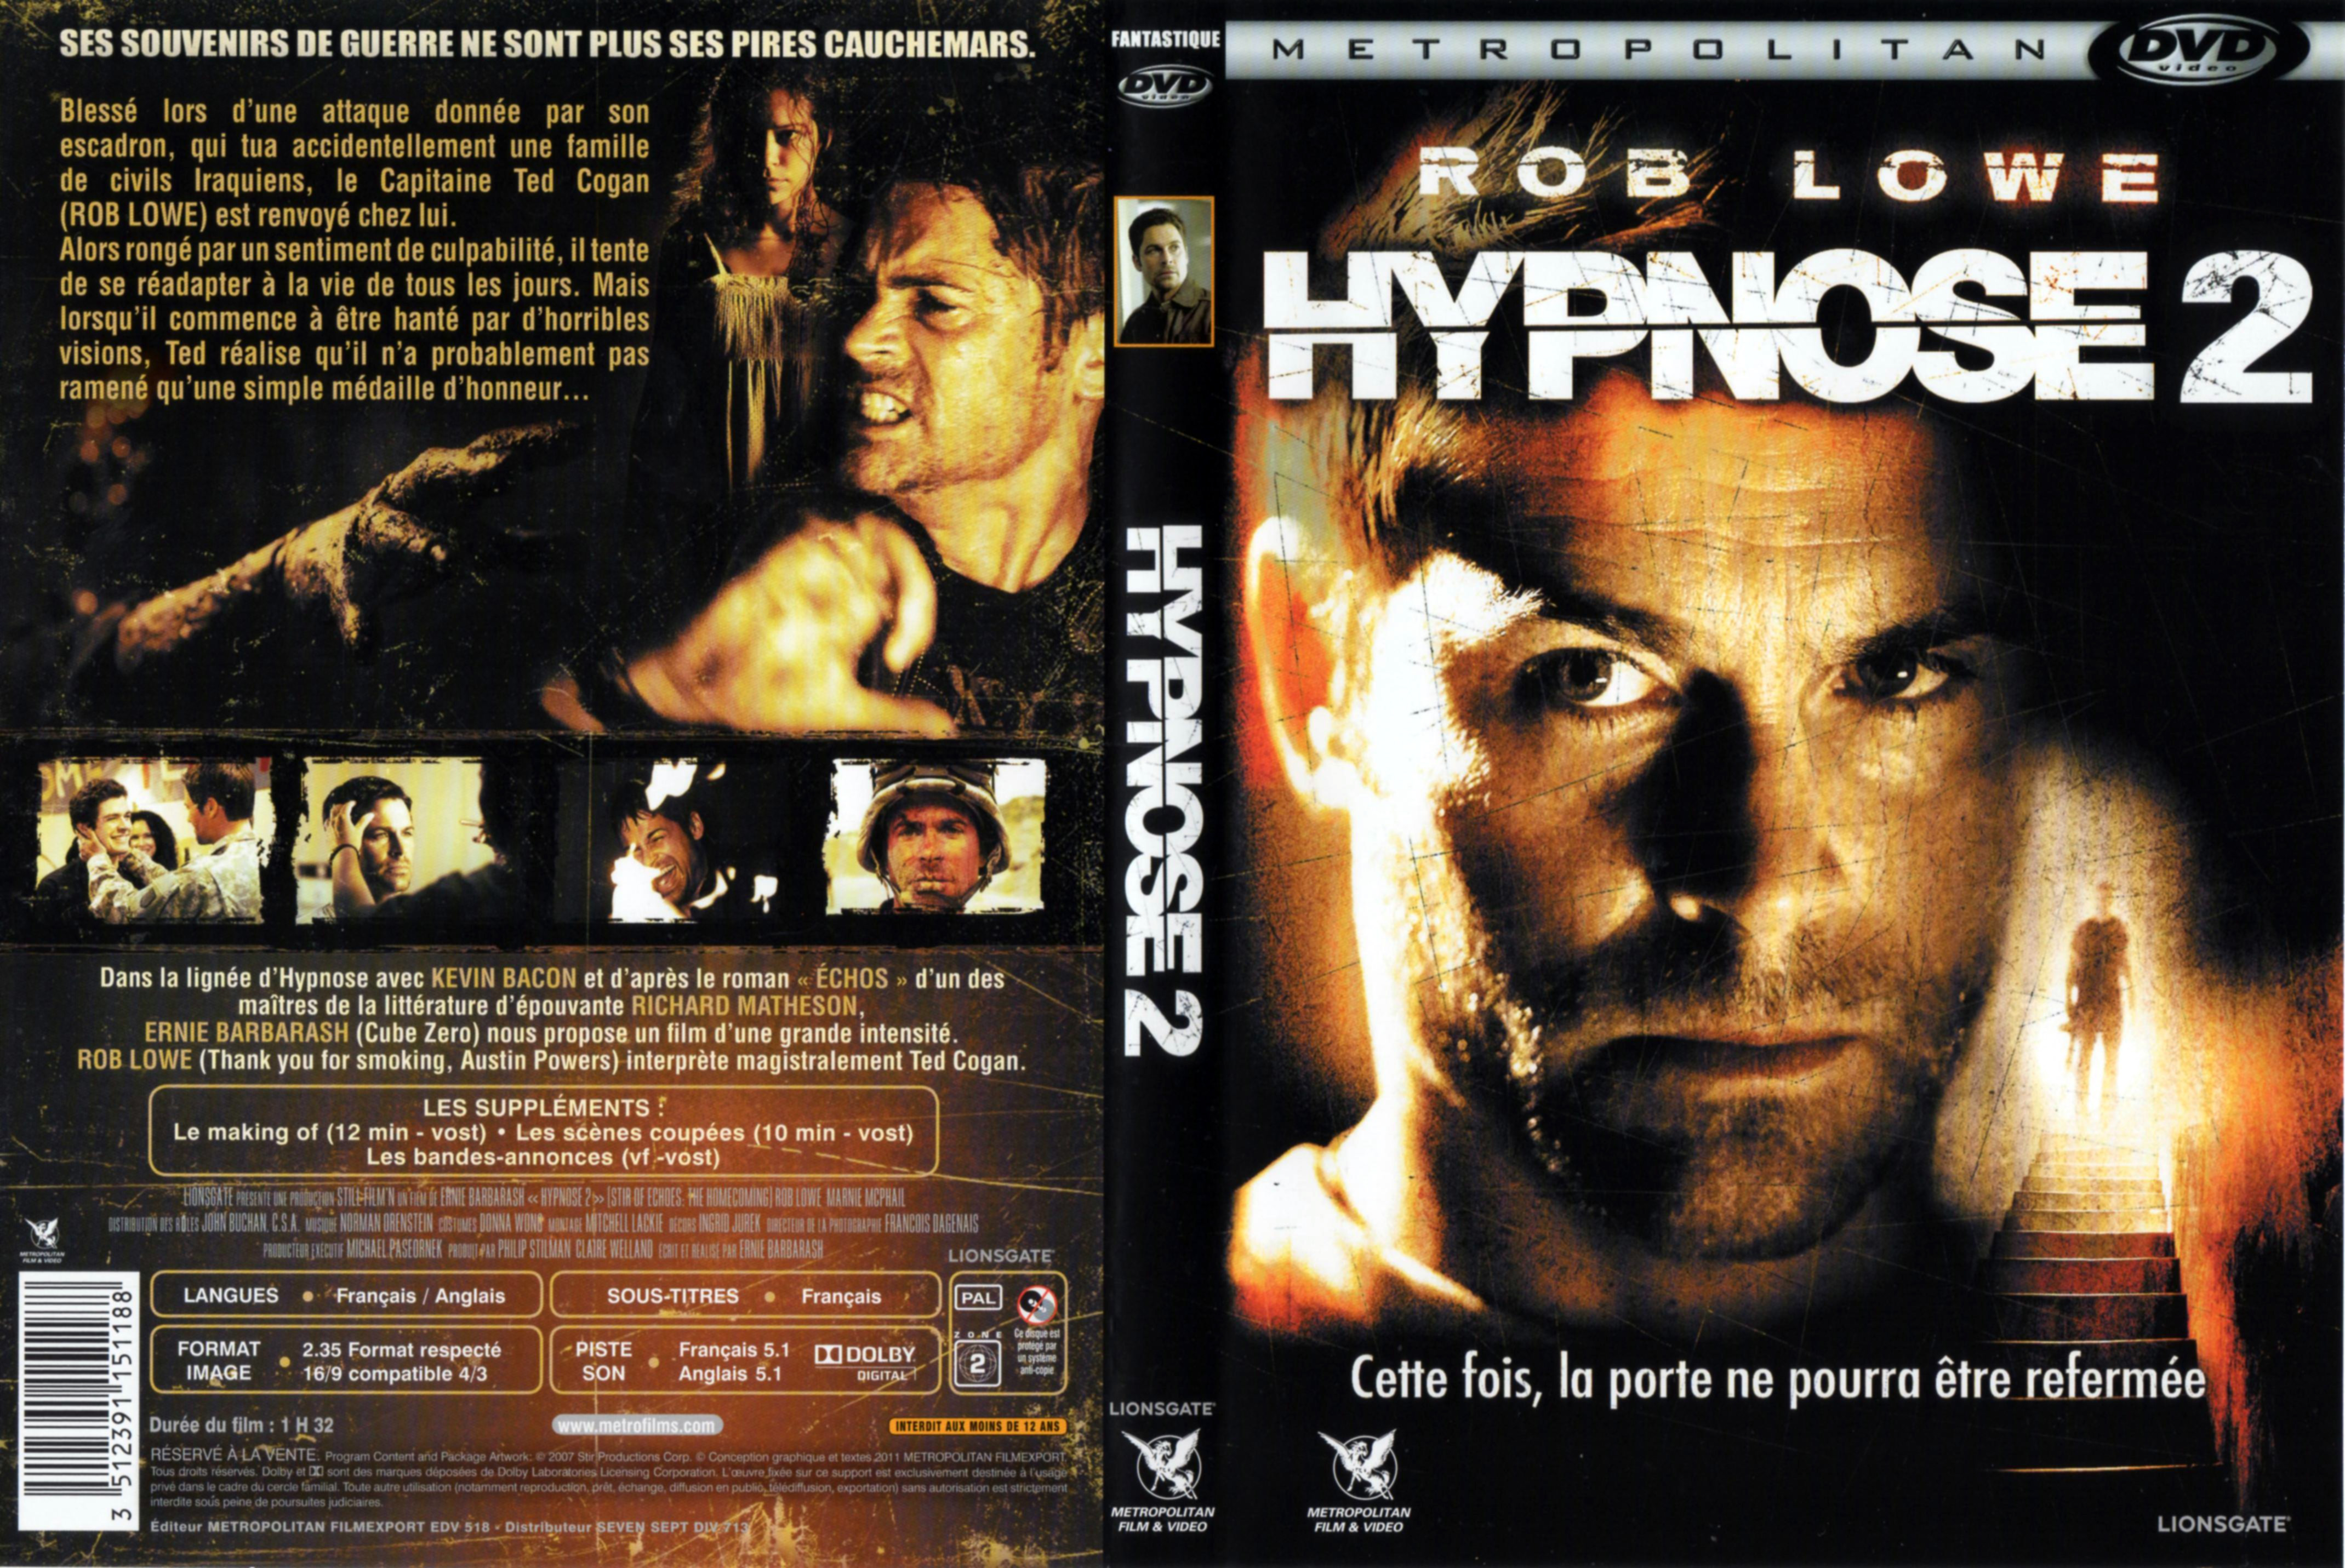 Jaquette DVD Hypnose 2